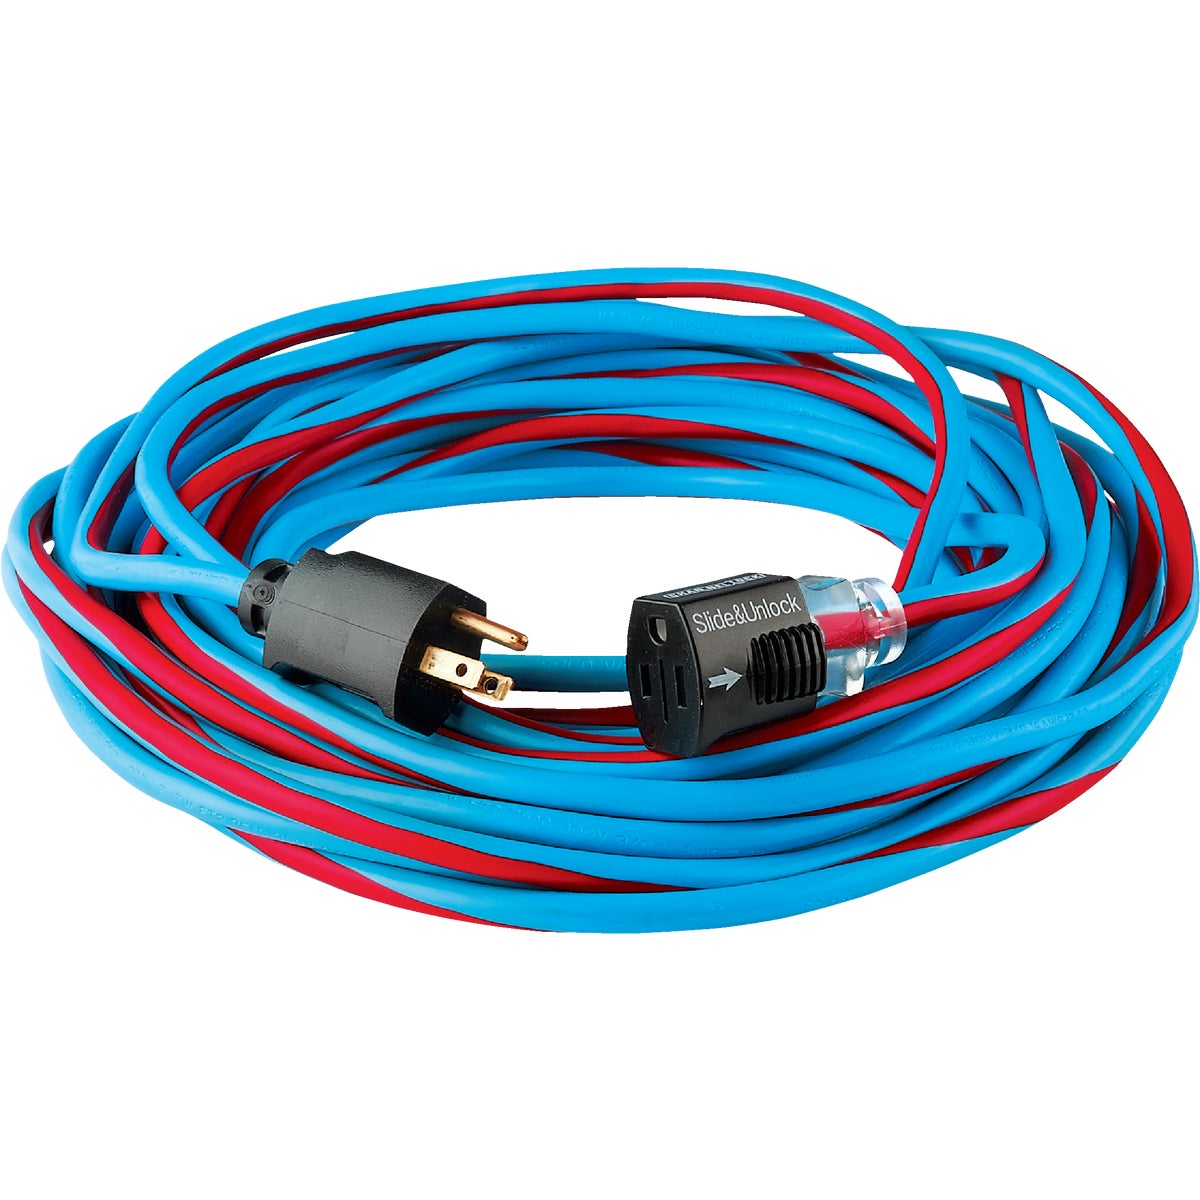 Item 500178, Channellock extension cord, the ideal cord for your home or jobsite.